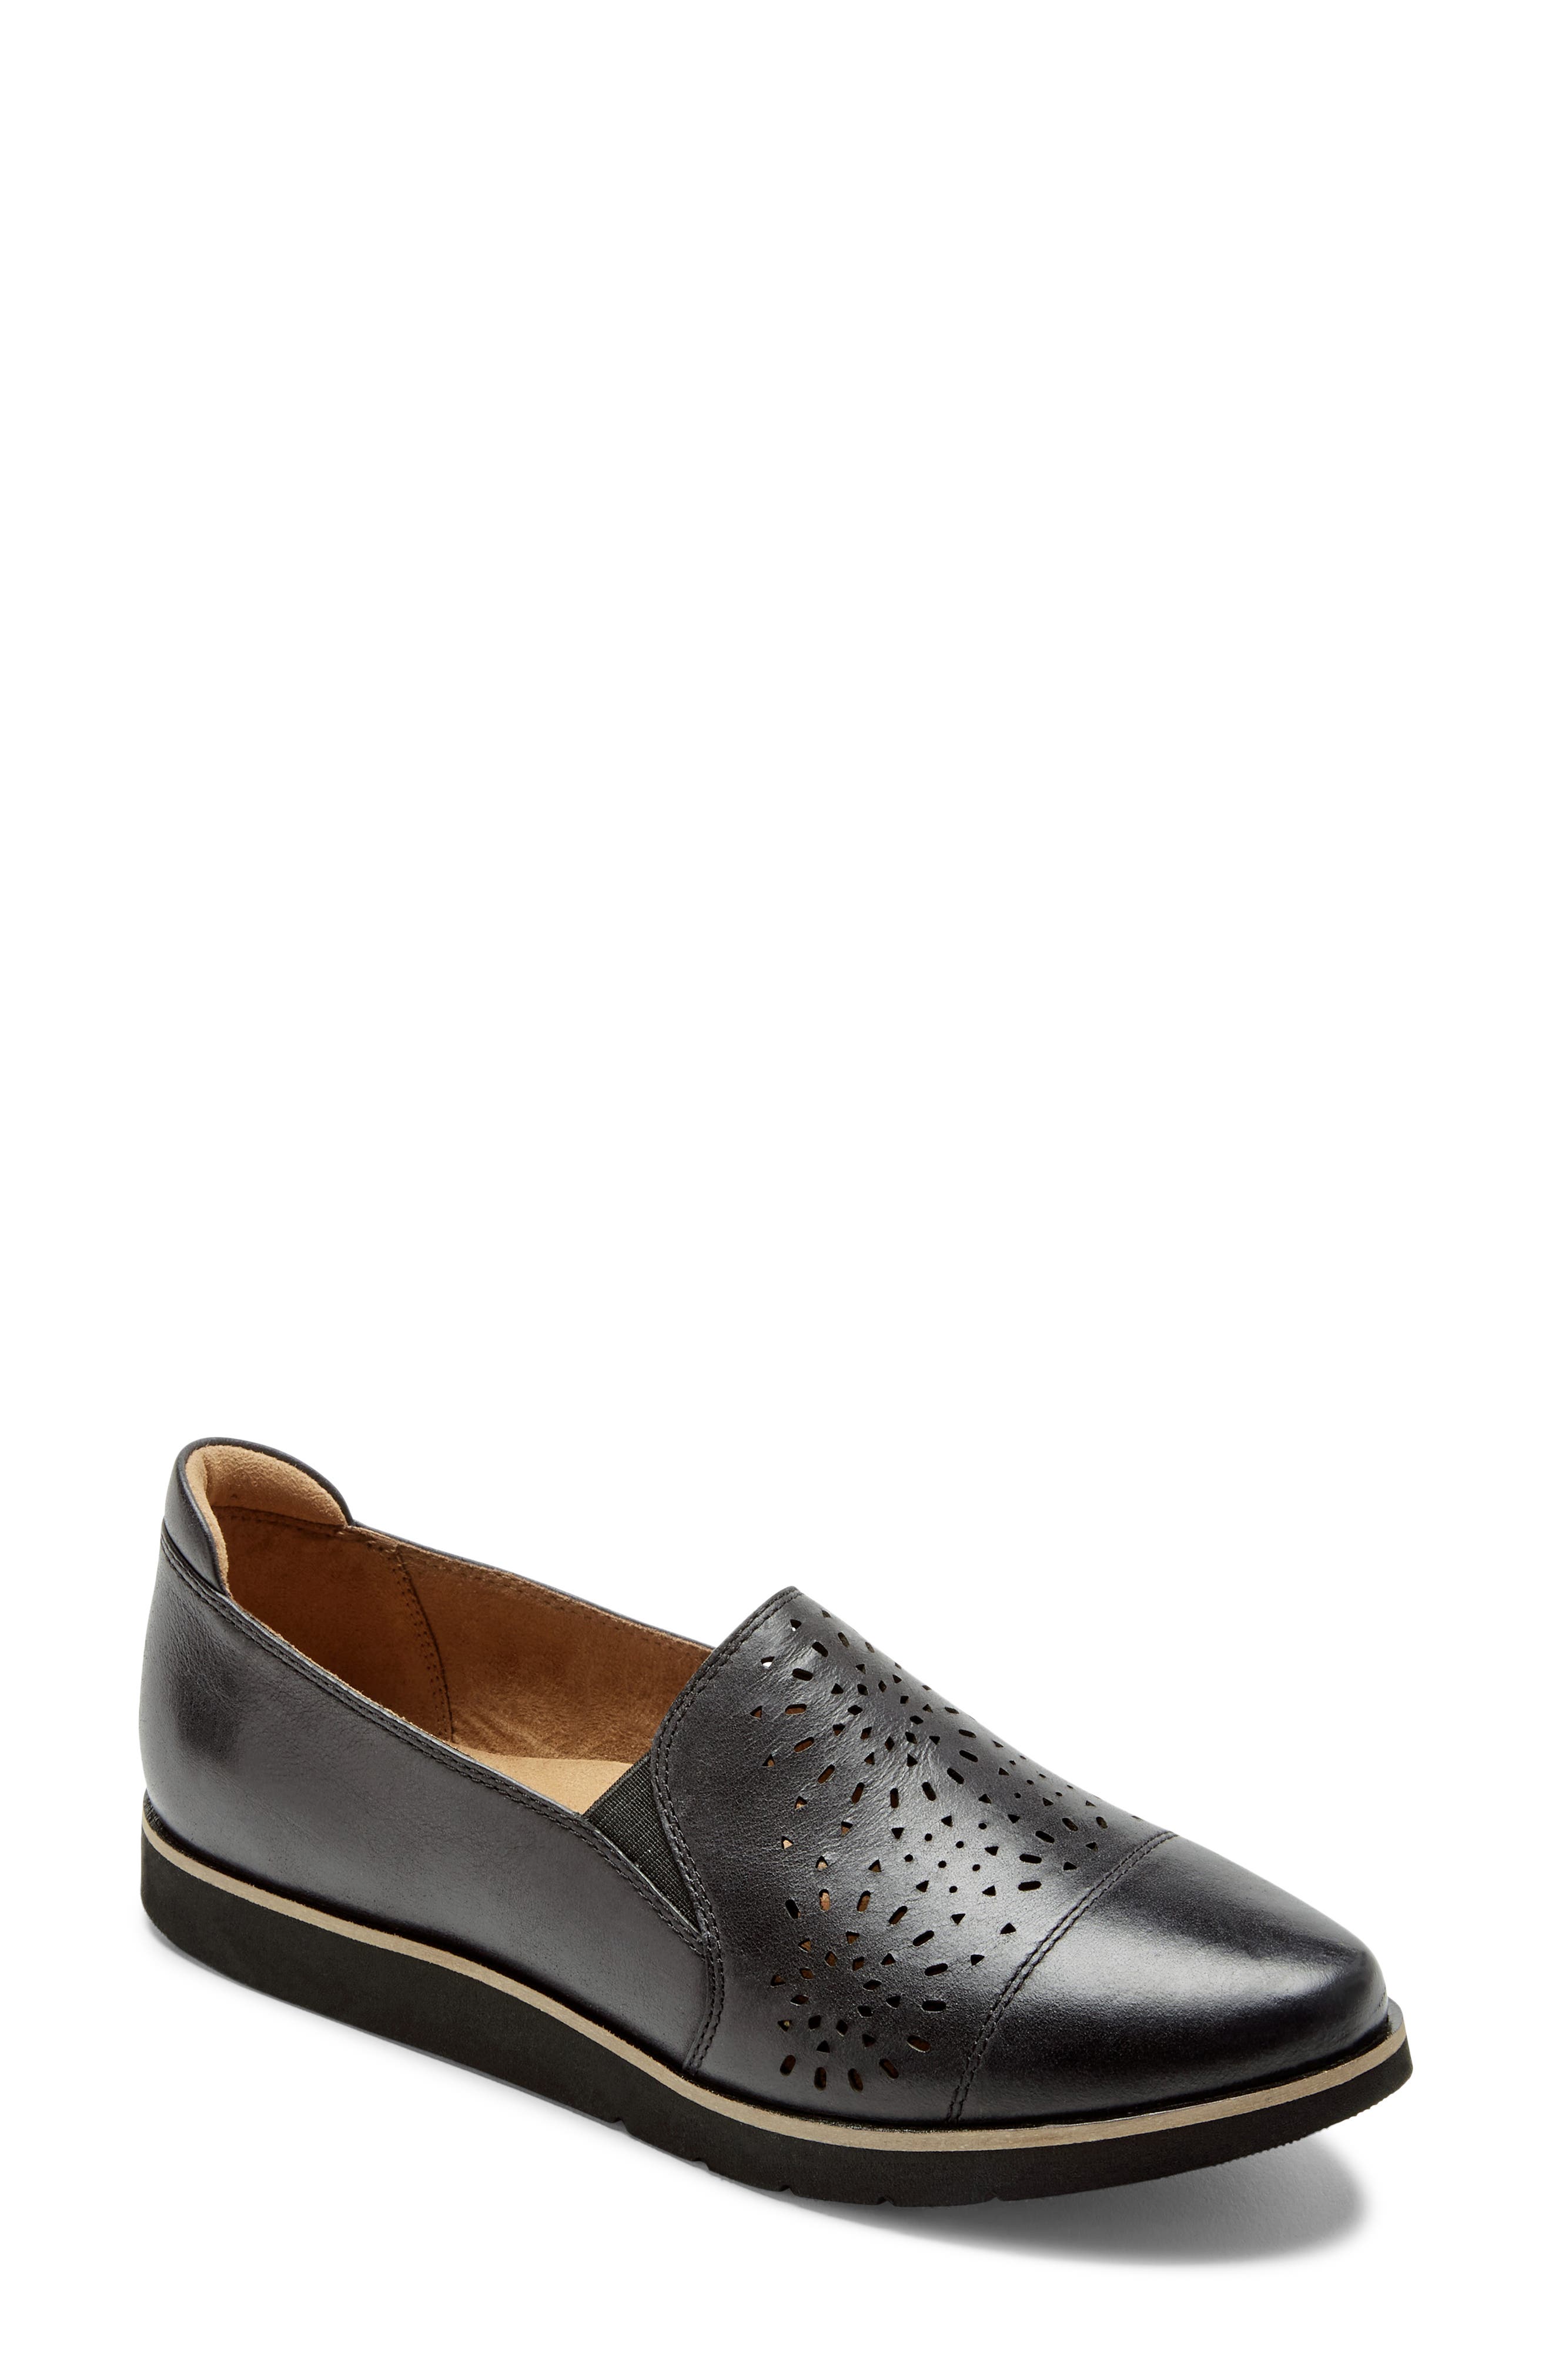 SoftWalk Womens Whistle Loafer 